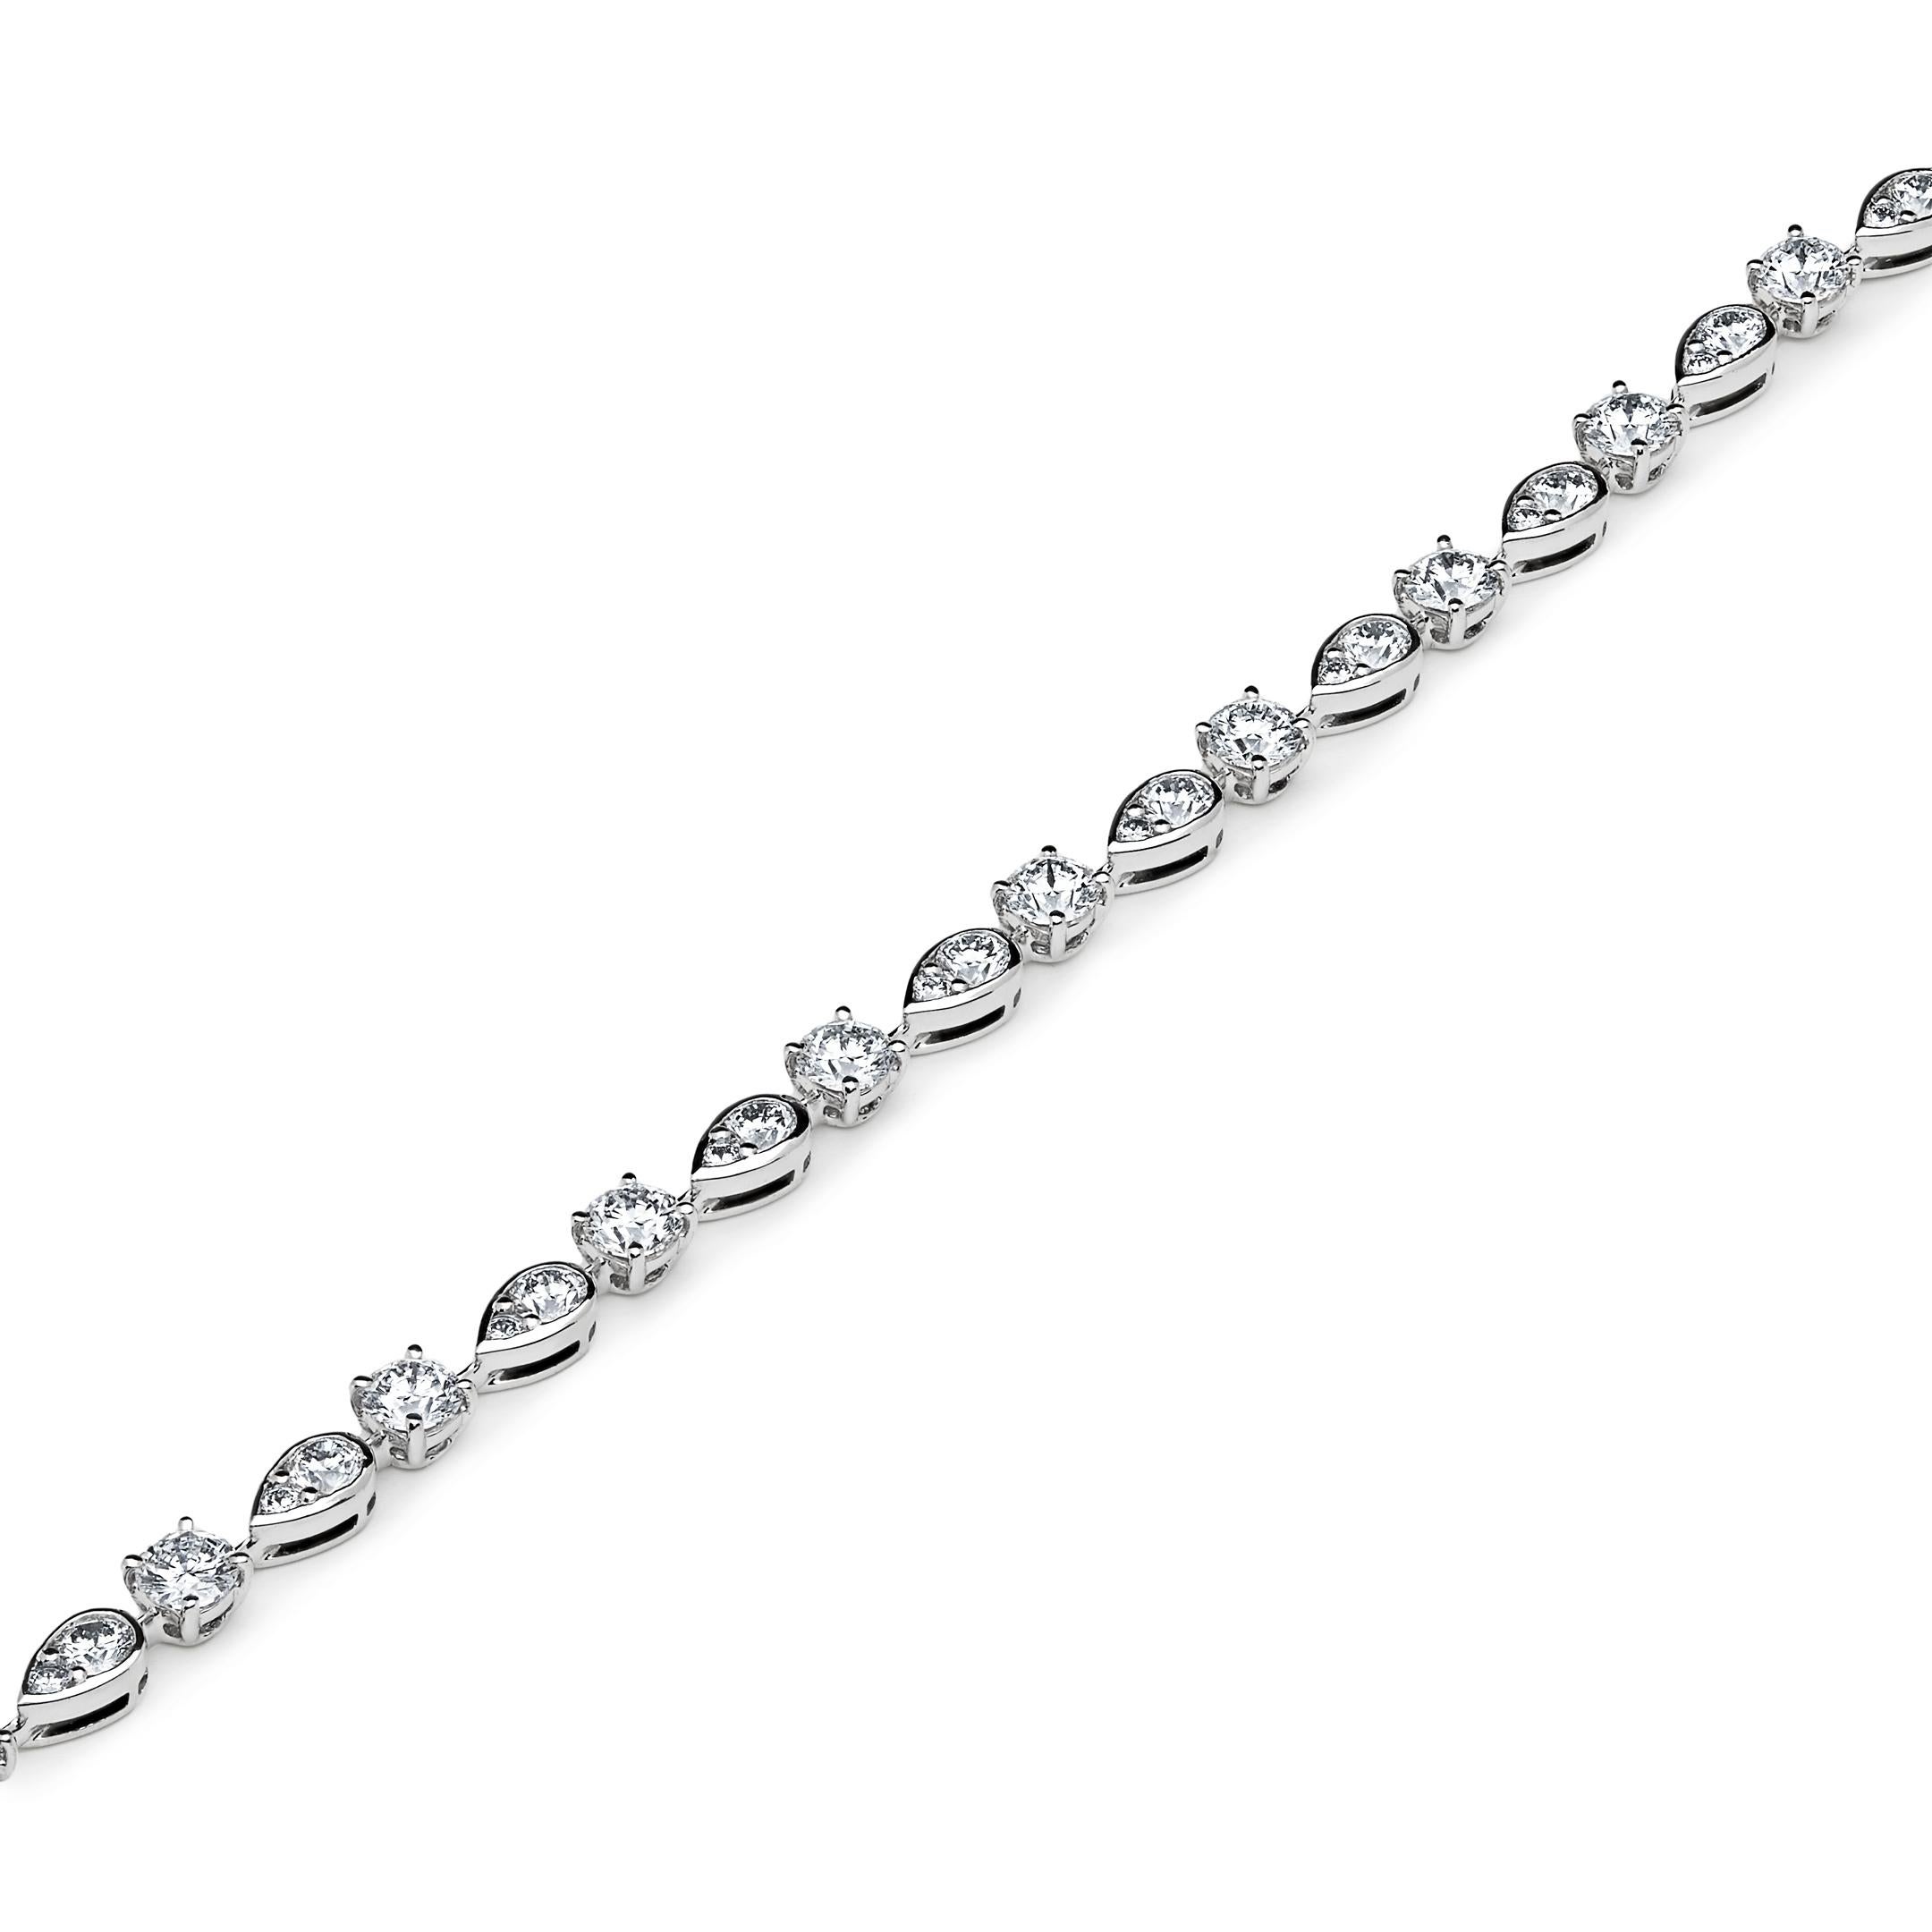 Graff Platinum and White Gold Line Bracelet with White Round Diamonds and Pear Shape Motif

Please contact us for more information. 

*To keep your jewelry in excellent condition, avoid all exposure to moisture, perfume, lotions and